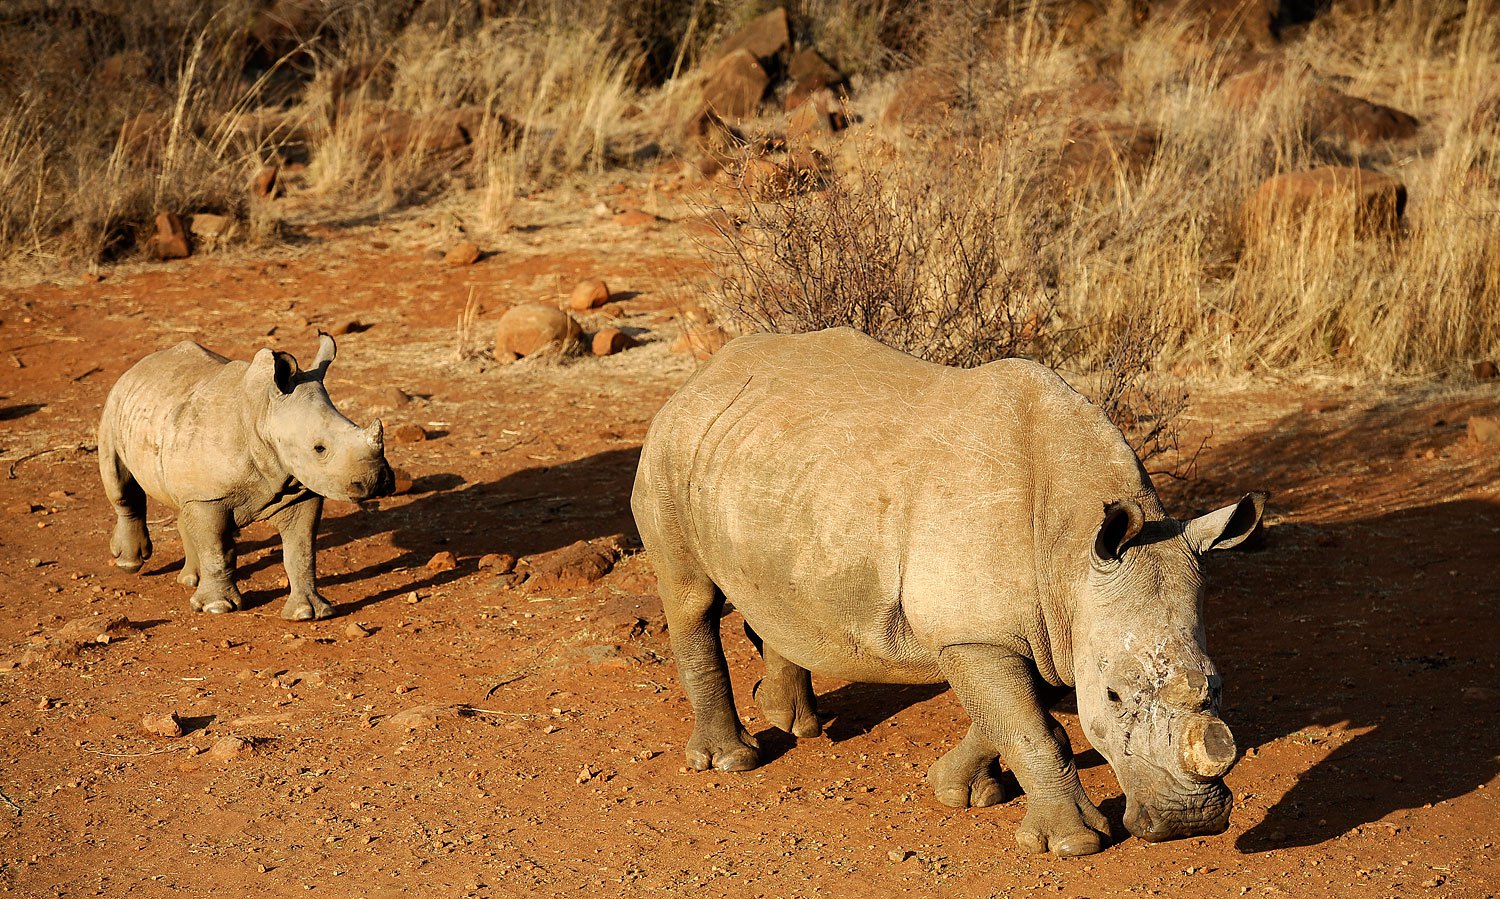 A black dehorned rhinoceros is followed by a calf on August 3, 2012 at the Bona Bona Game Reserve, southeast of Johannesburg, South Africa. The western black rhino subspecies (not pictured) has now been officially declared extinct. (Stephane De Sakutin&mdash;AFP/Getty Images)